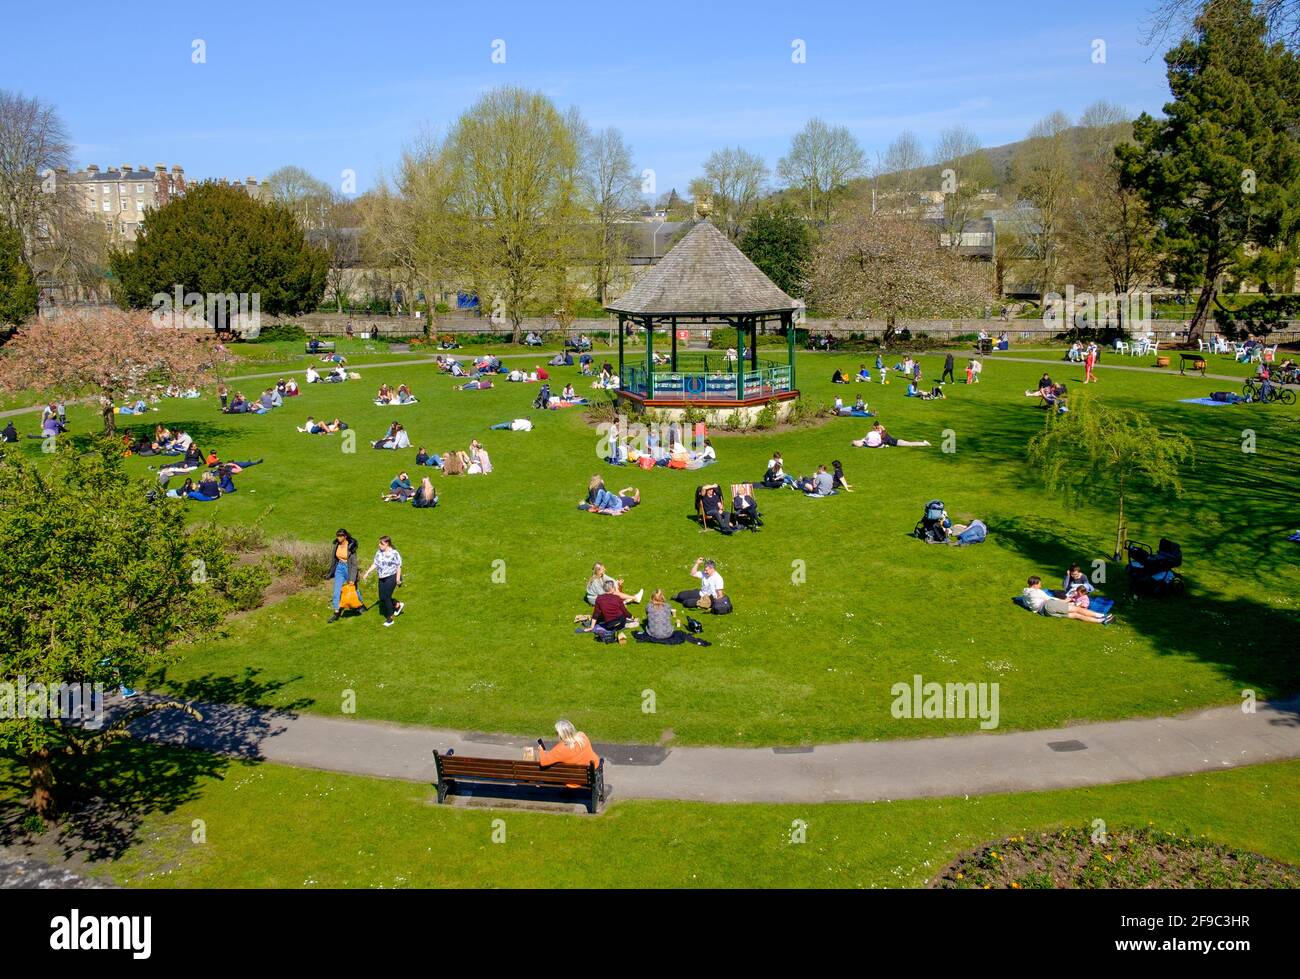 Bath, Somerset, UK. 17th April, 2021. On the first Saturday after the Covid stay at home lockdown restrictions were lifted in England, people are pictured enjoying the sunshine in Parade Gardens. Credit: Lynchpics/Alamy Live News Stock Photo